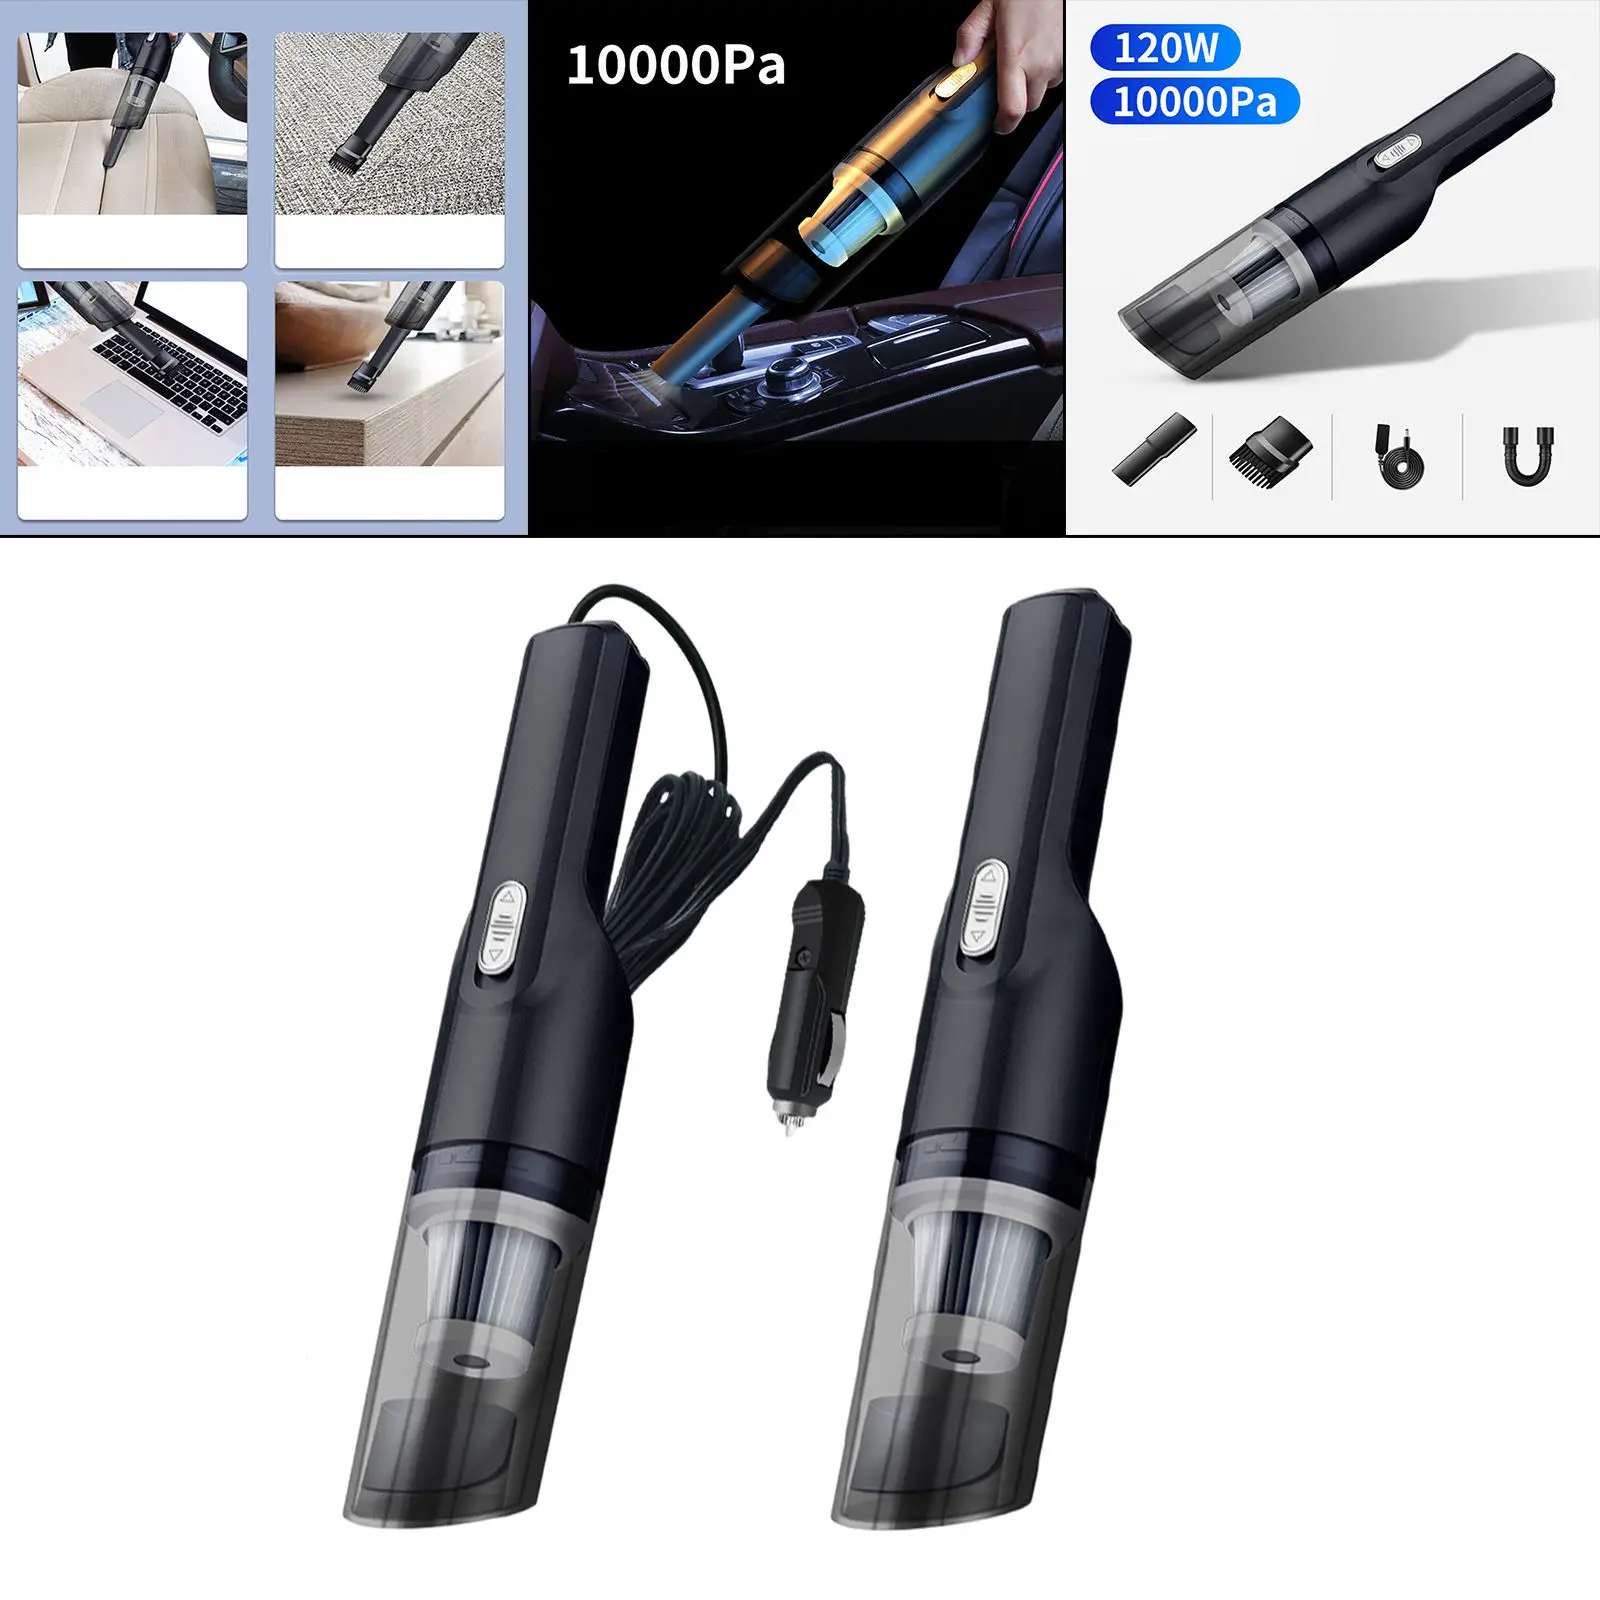 10000Pa Wireless Car Vacuum Cleaner Auto Portable Truck SUV Vacuum Cleaner Cordless Wet Dry for Home Office Car